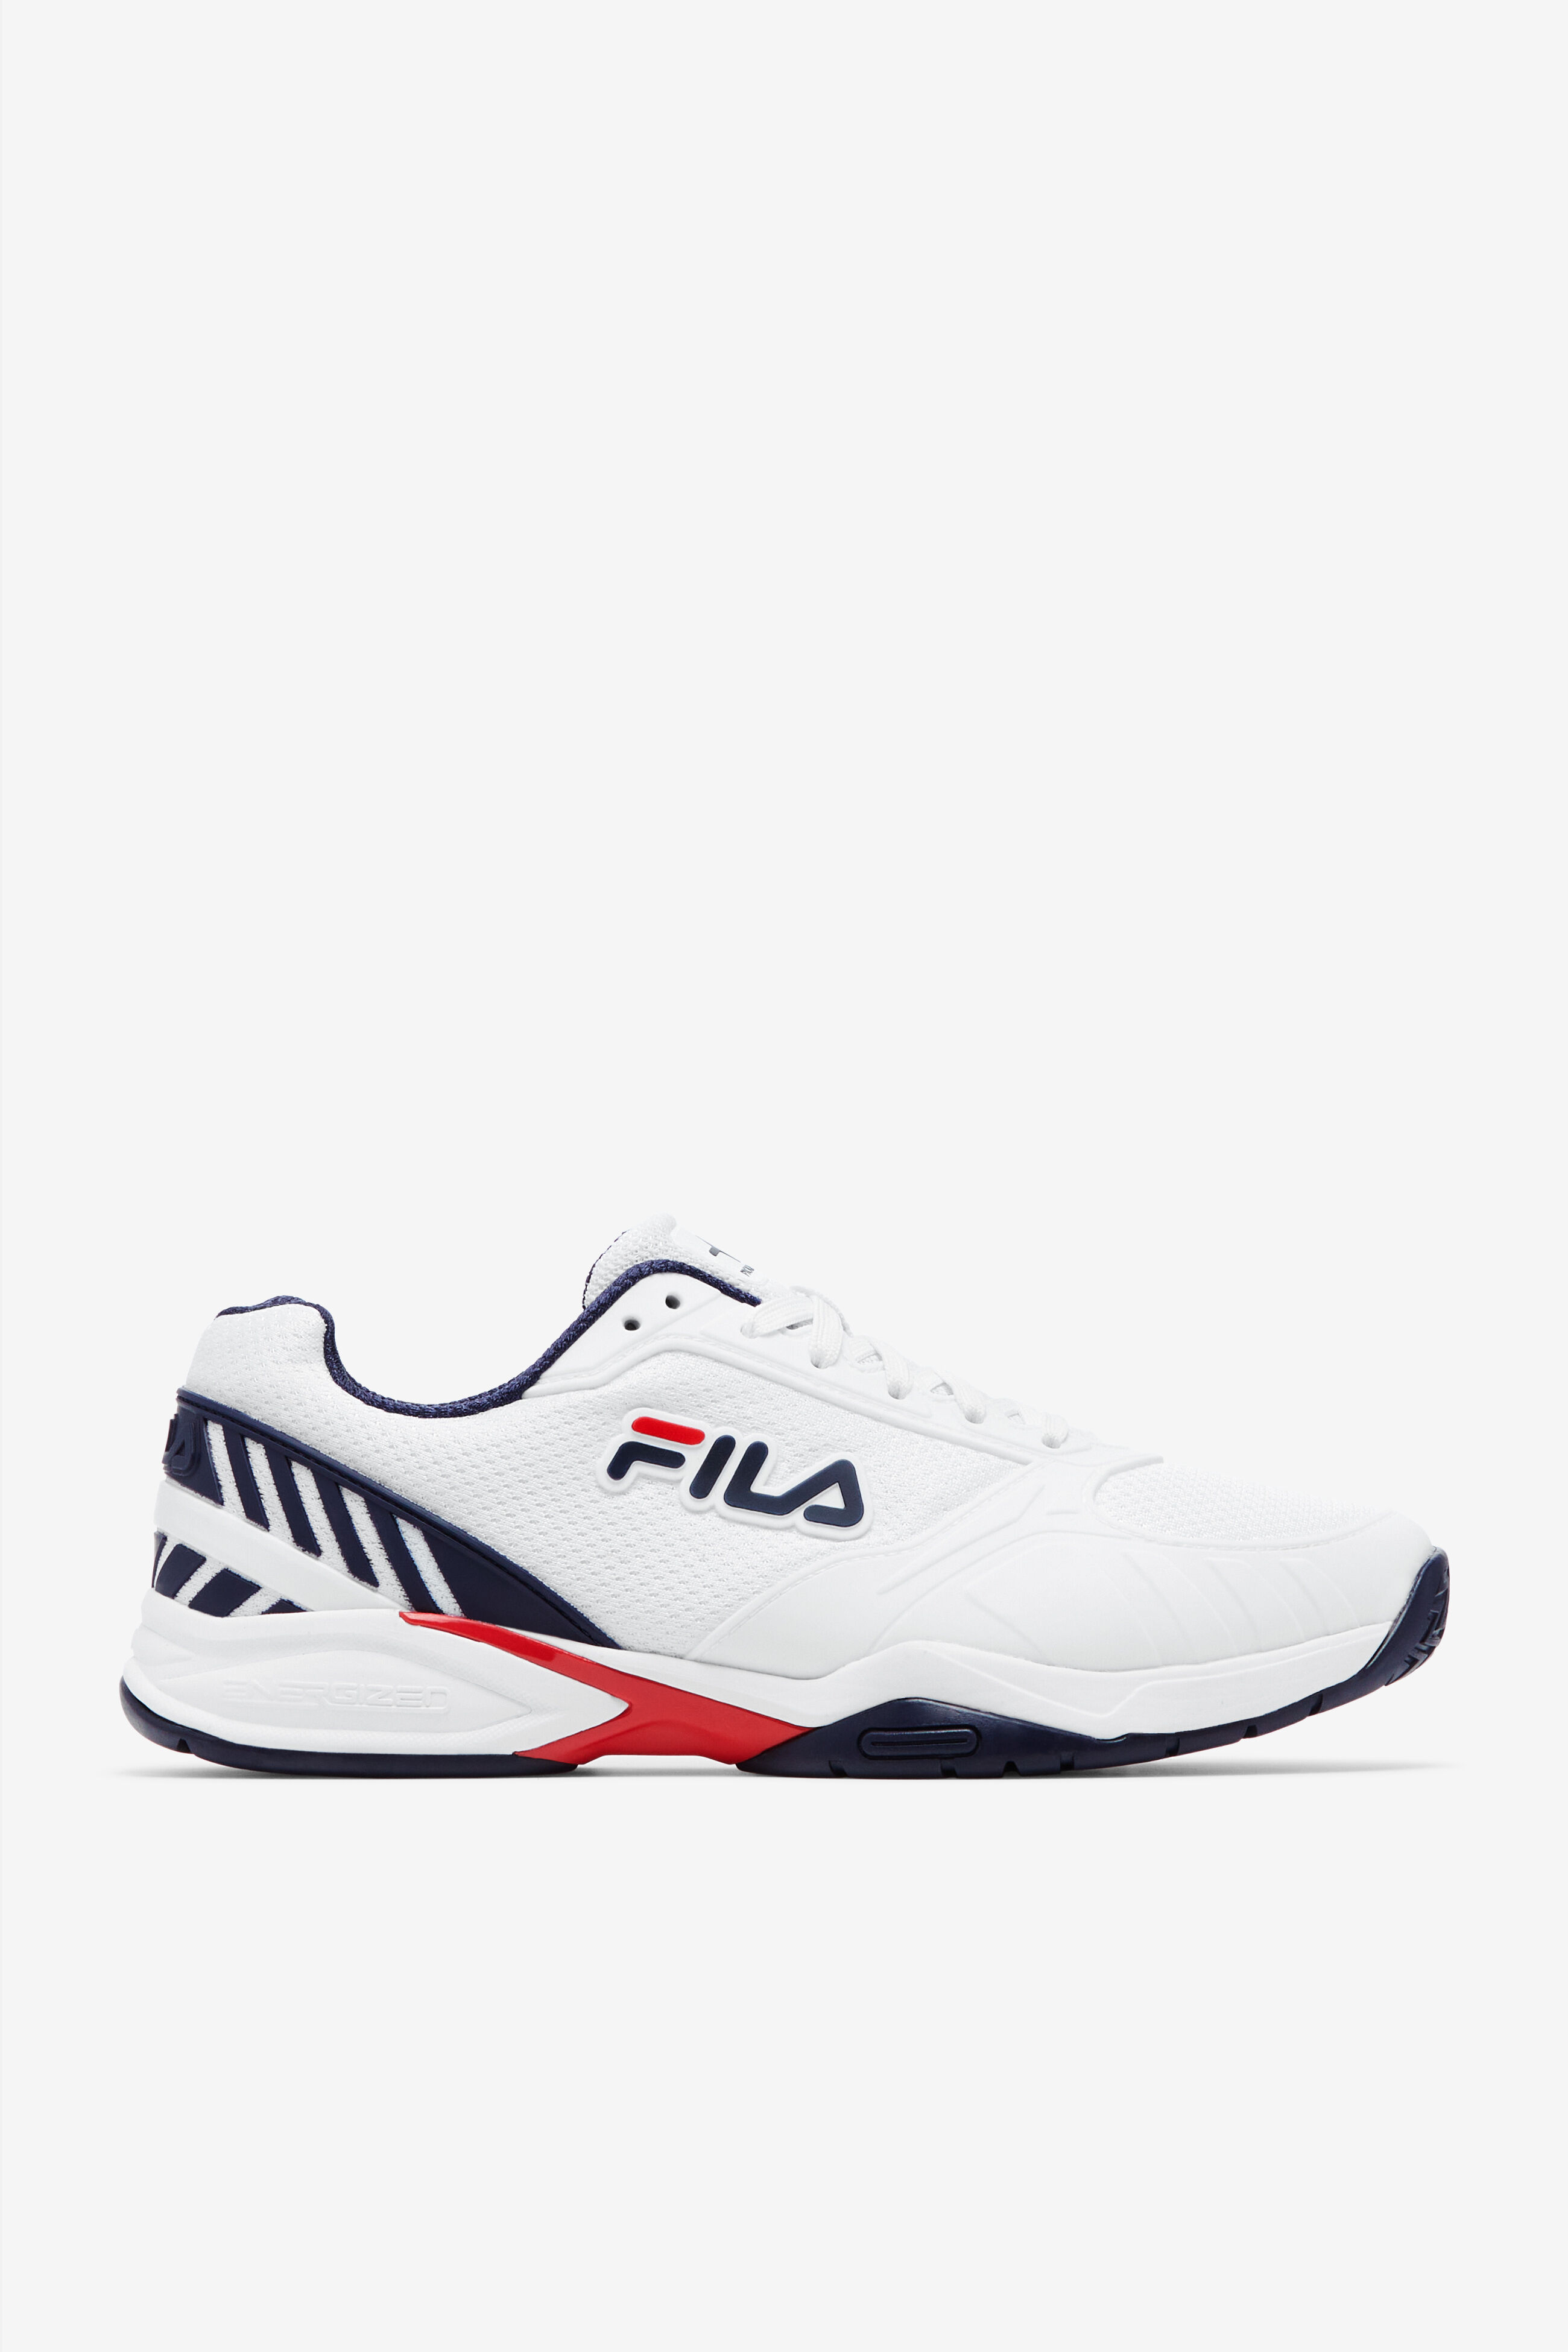 Volley Zone Men's Pickleball Court Shoes | Fila 723567668963